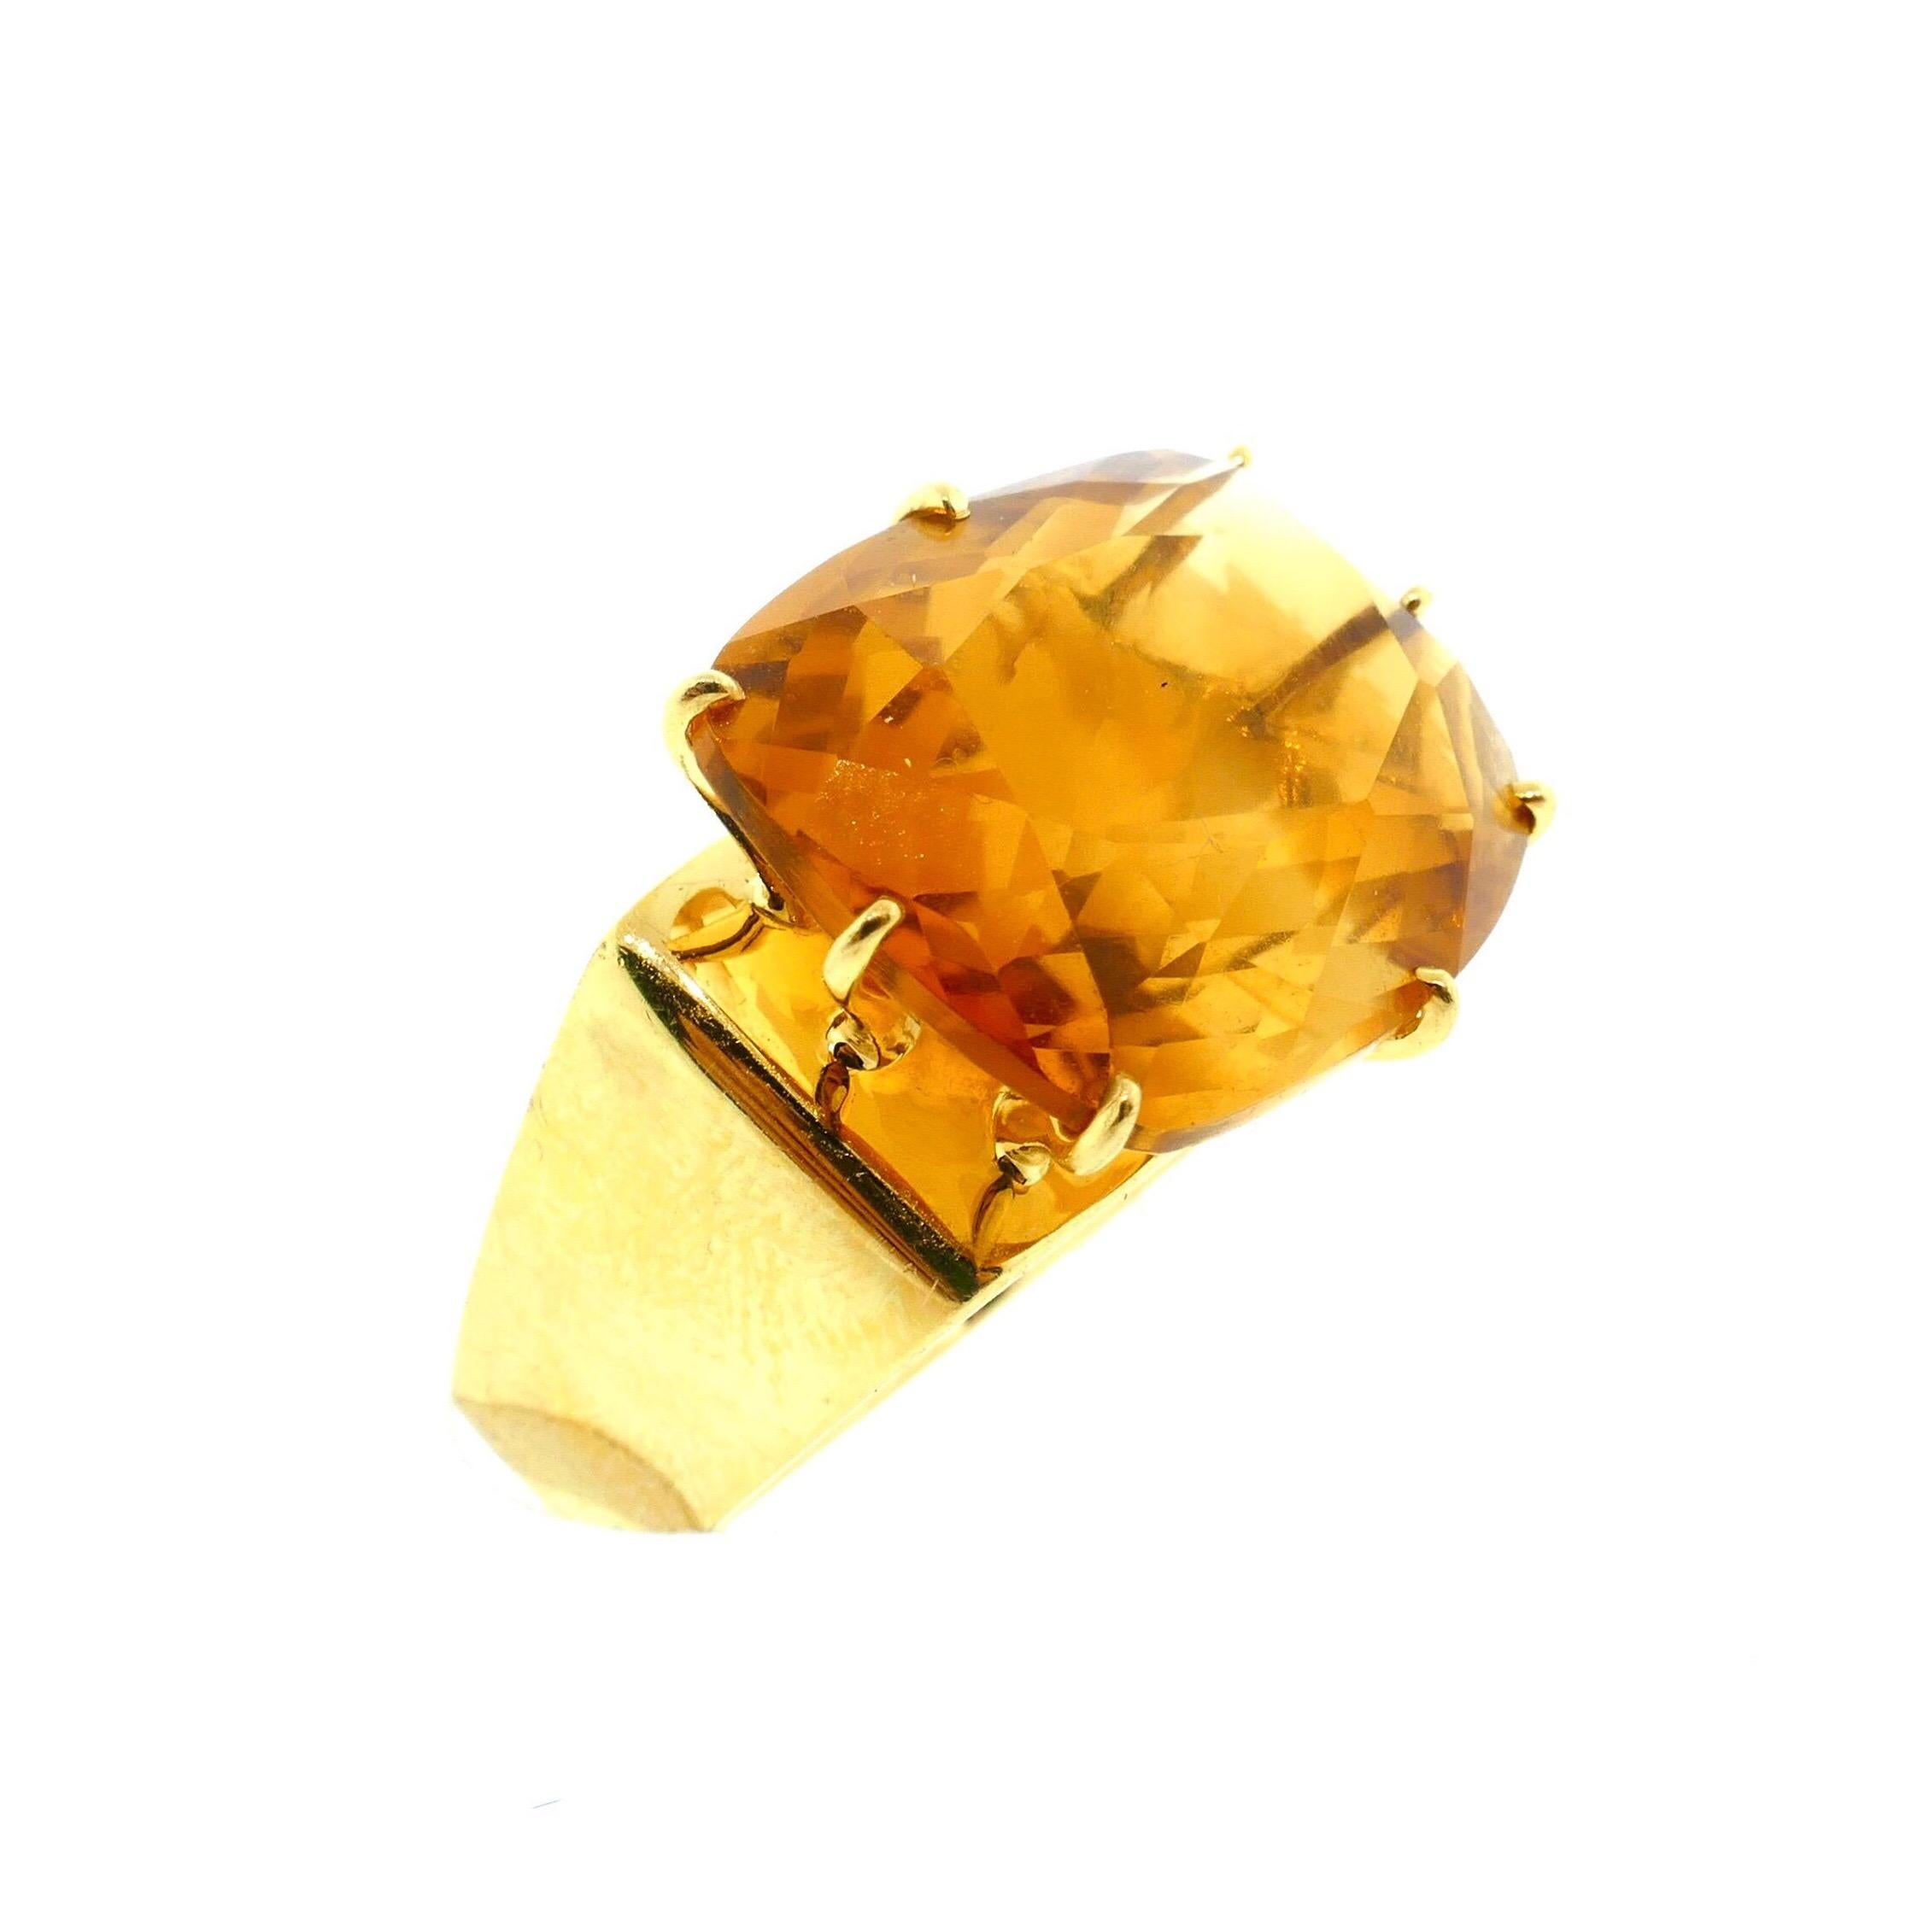 French Modernist Square Shape Yellow Gold, Diamond, And Citrine Ring

This is a beautiful French modernist design ring. It features a 18k yellow gold, a diamond, a sapphire (hidden on the inside of the band), and a gorgeous large citrine.

Size: 5.5